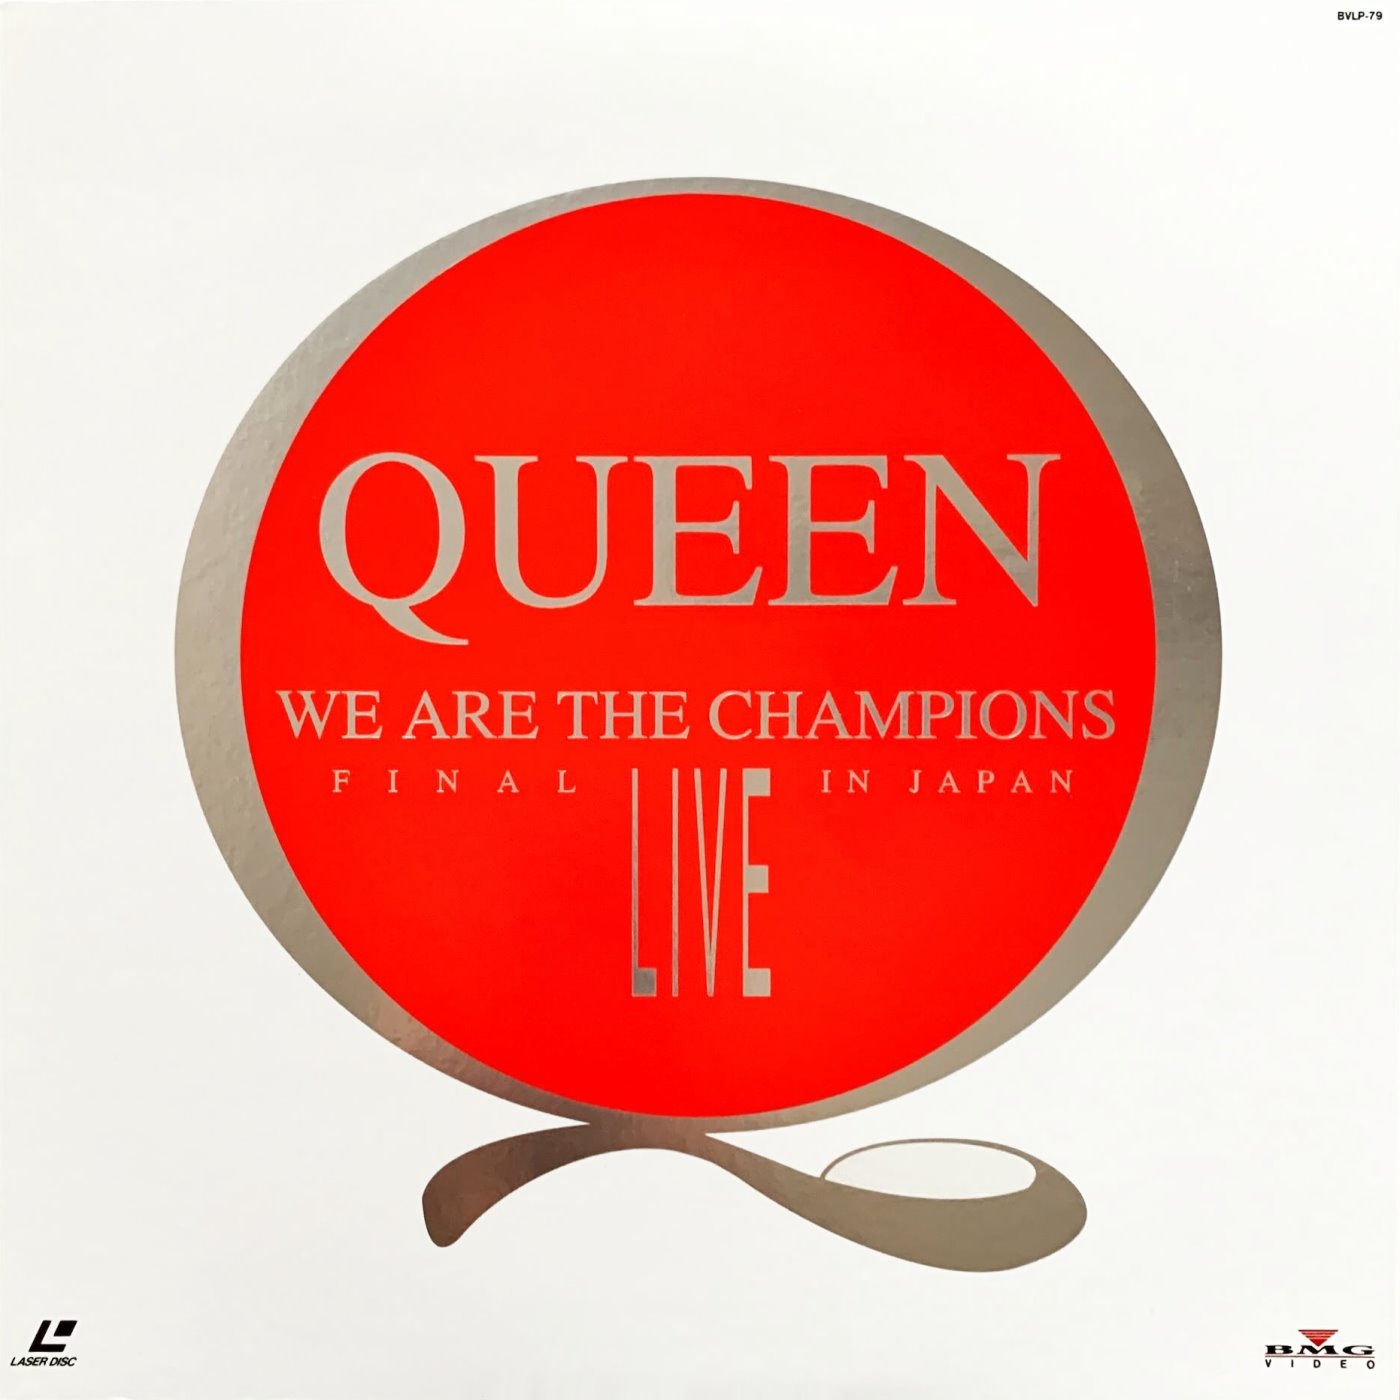 Cover - Queen - We Are the Champions - Final Live in Japan.jpg